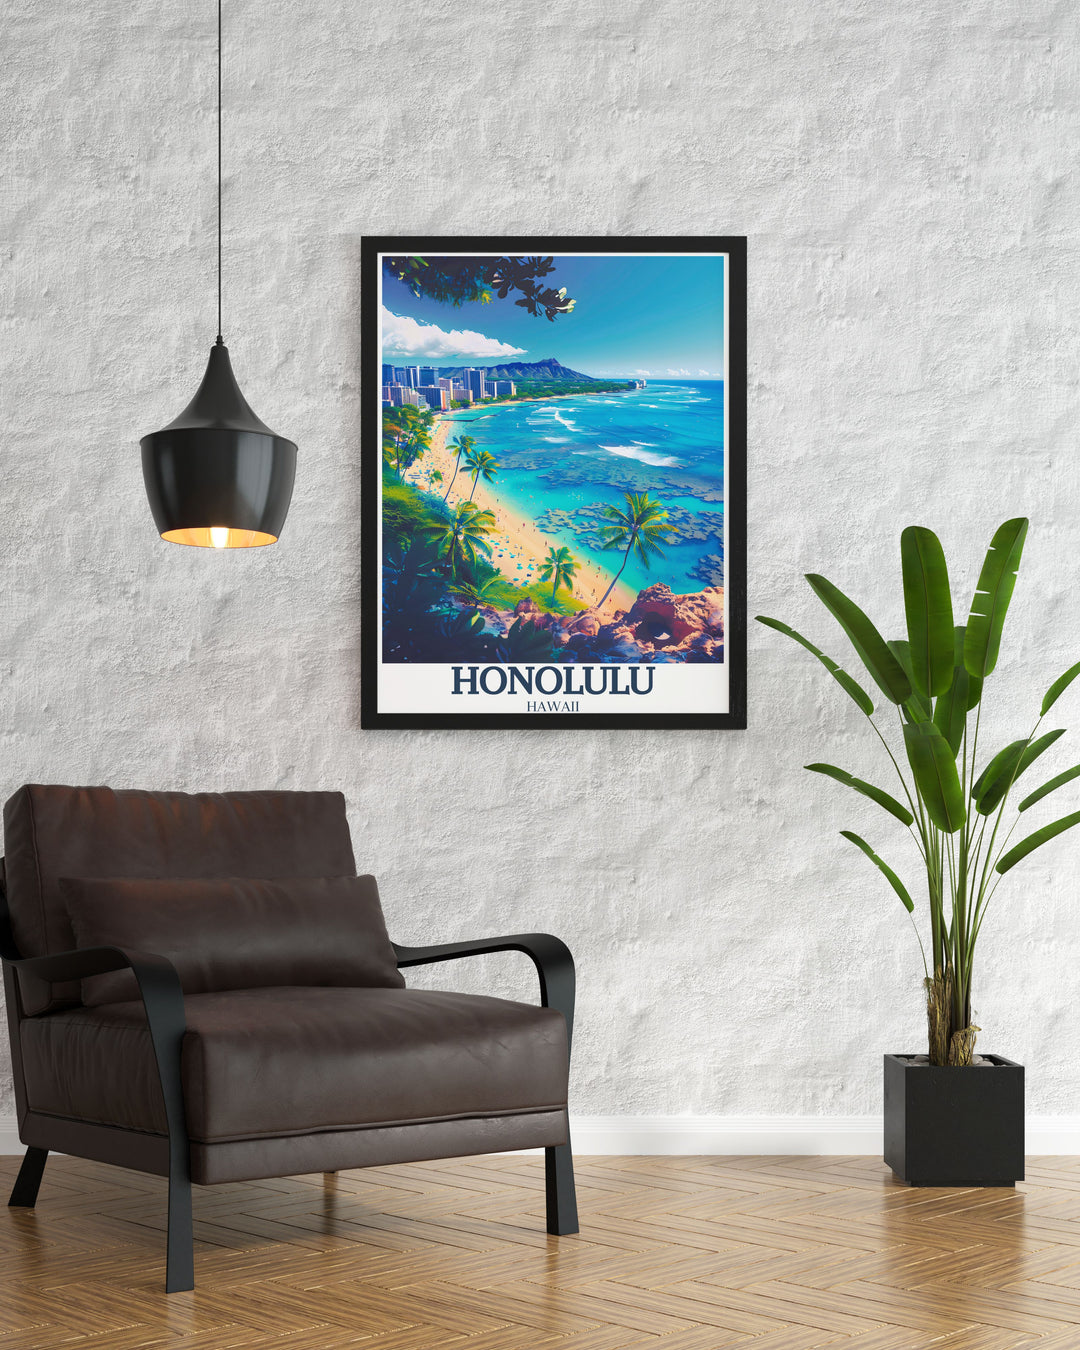 A home decor print highlighting the majestic Diamond Head Crater in Honolulu, Hawaii. The artwork captures the craters steep trail and panoramic views, ideal for bringing the beauty of Hawaiis natural landscapes into your living space.